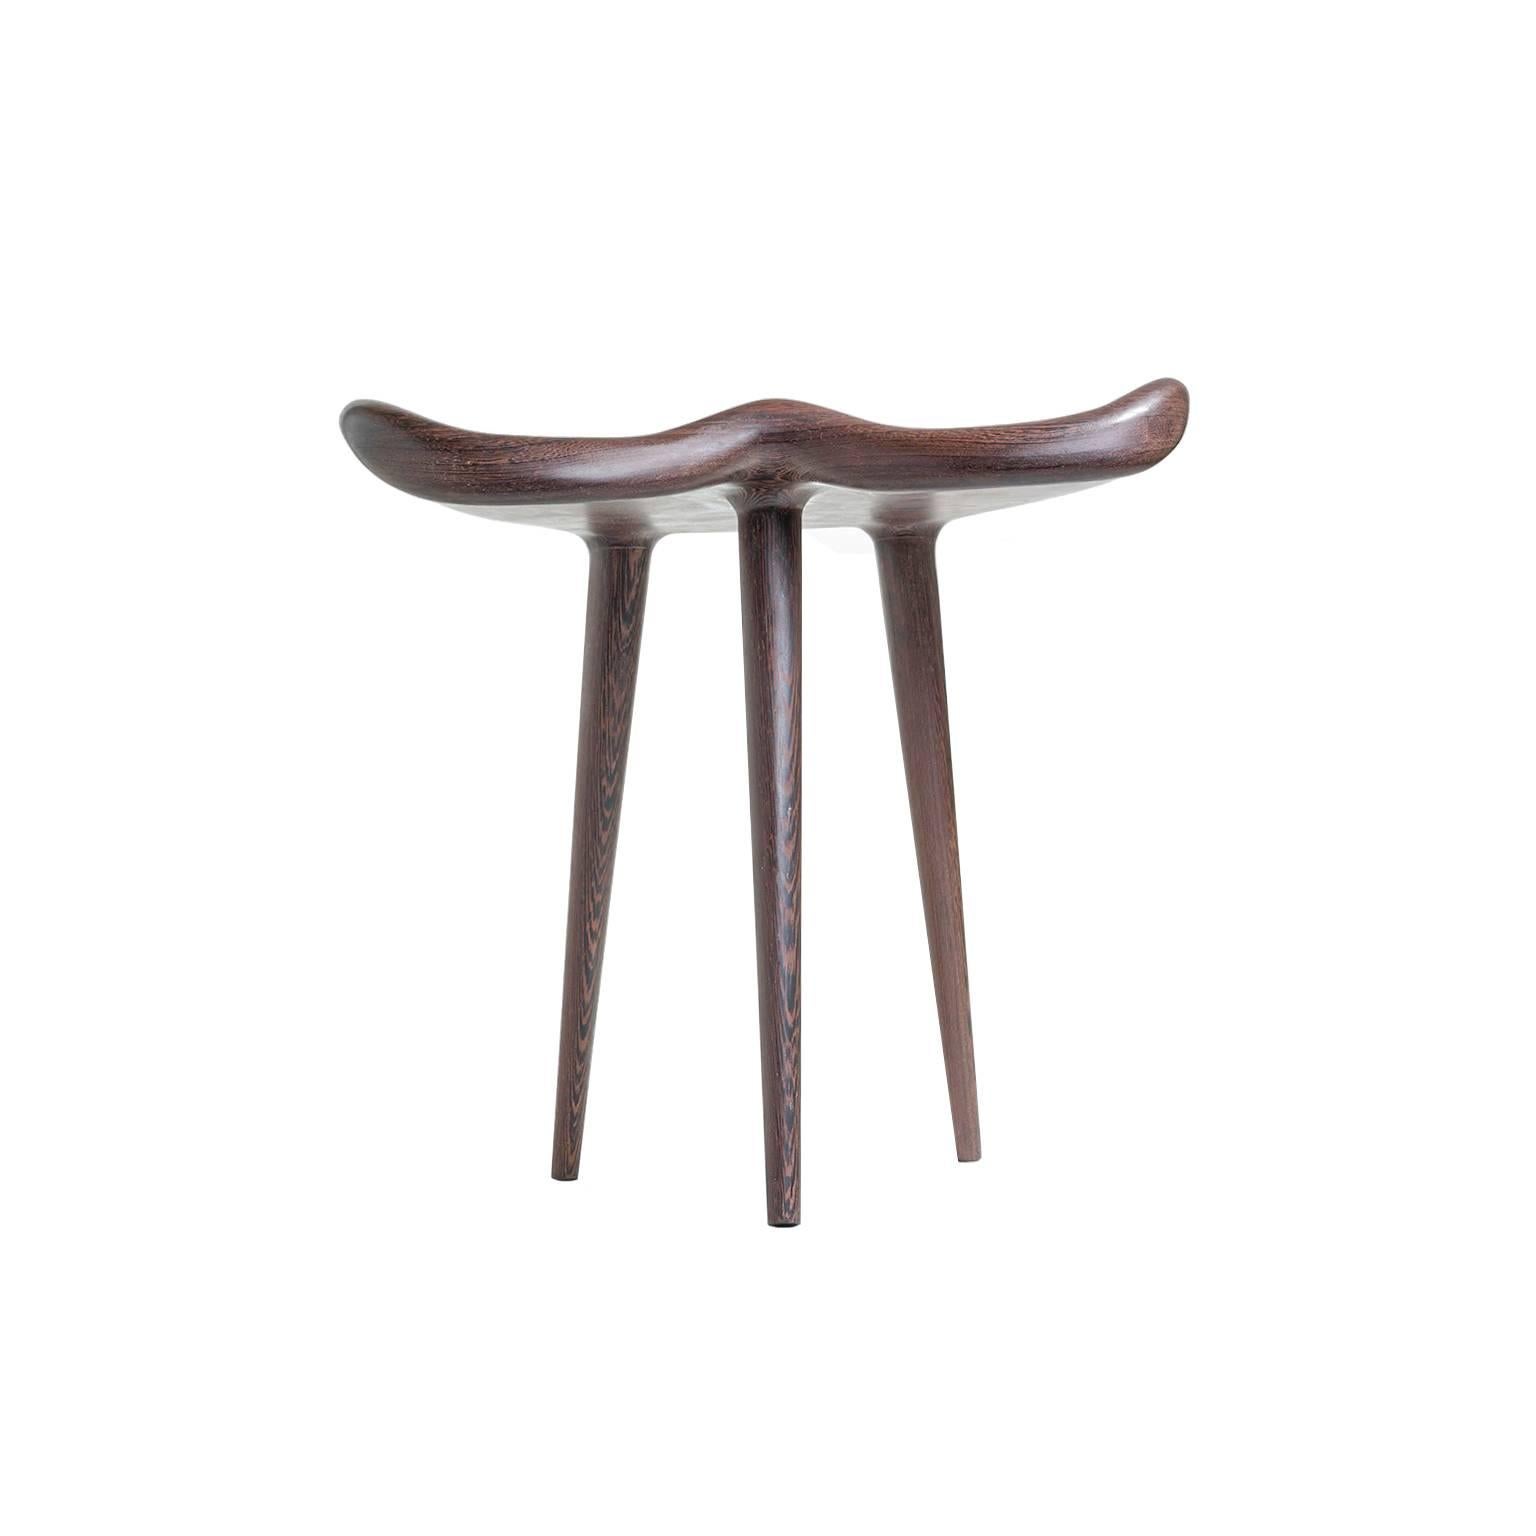 Stingray Stool by Michael Boyd for PLANEfurniture In Excellent Condition For Sale In Los Angeles, CA